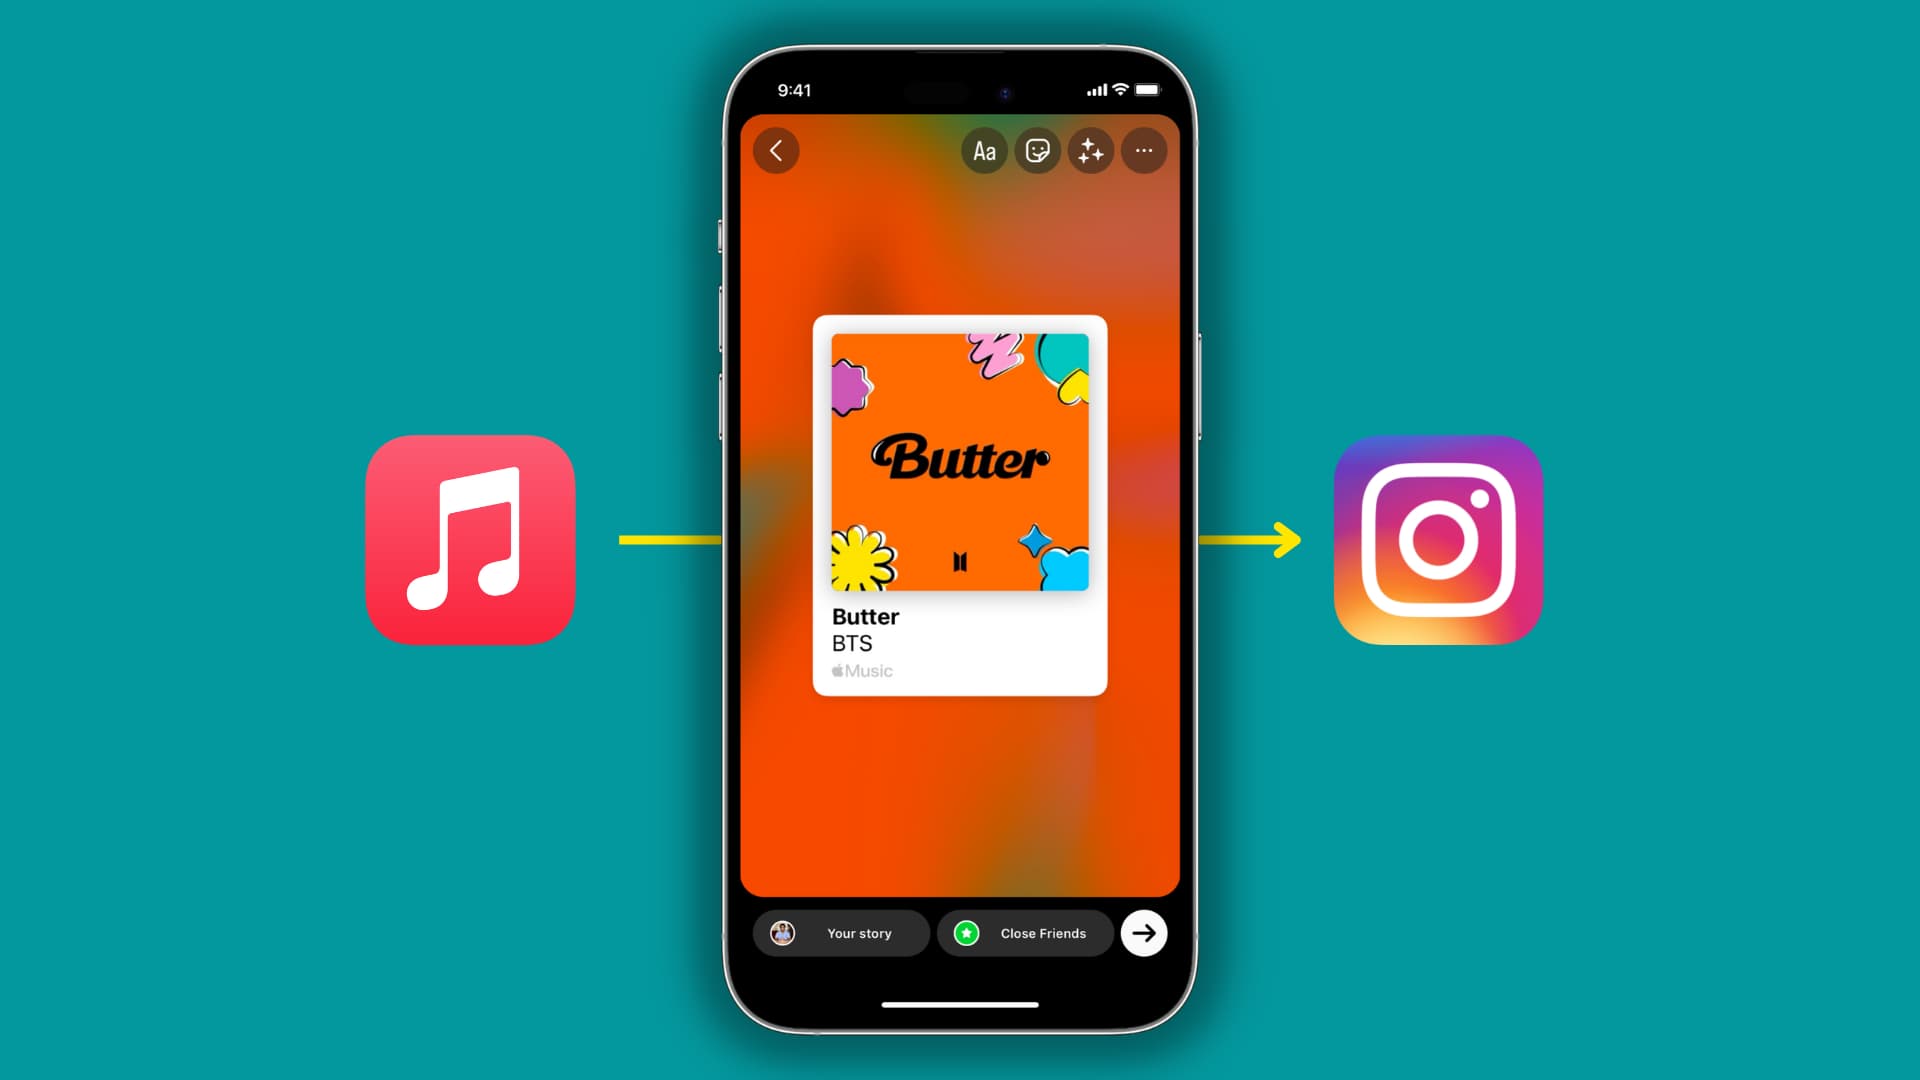 Share Apple Music song to Instagram on iPhone